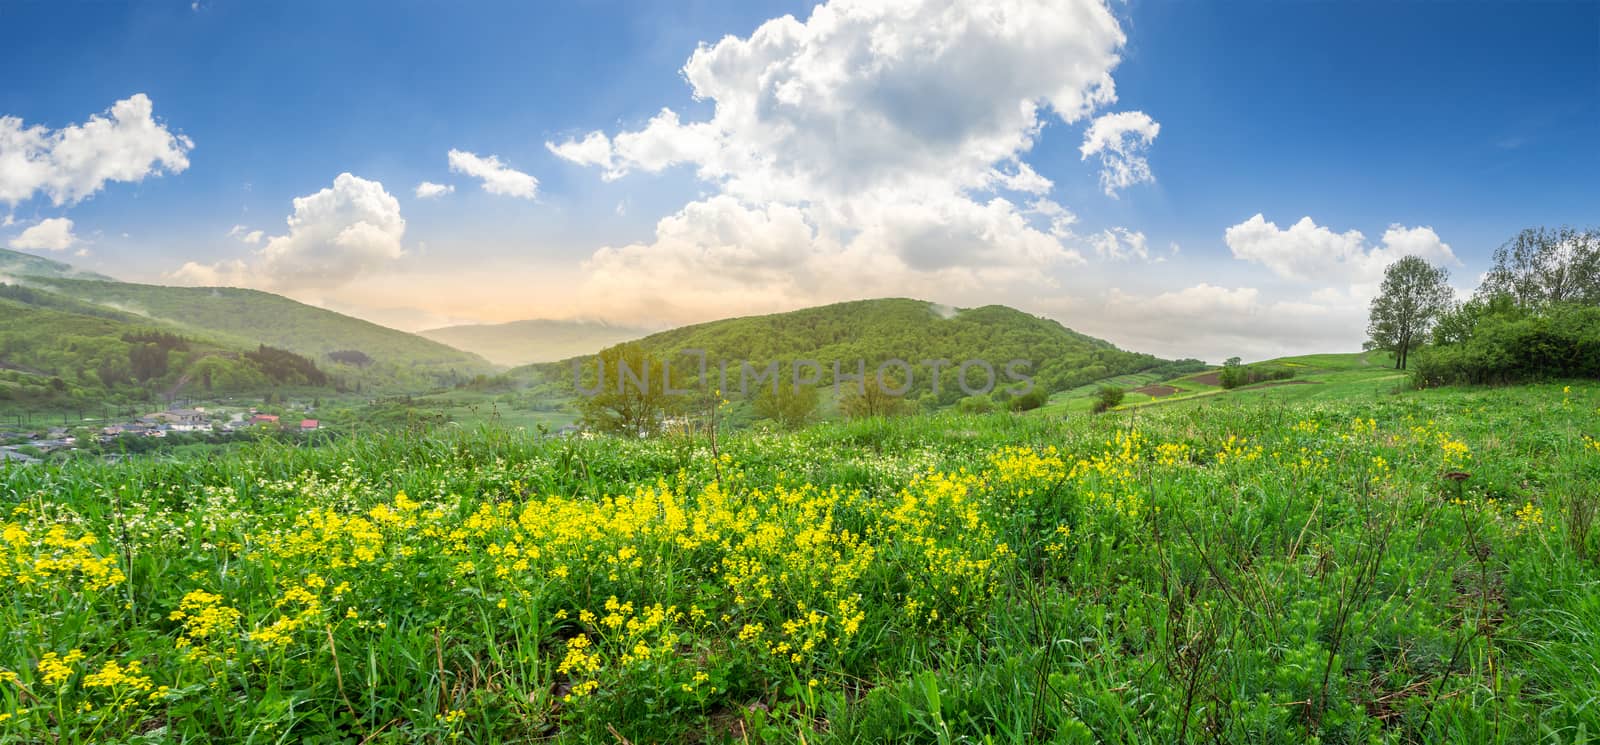 valley with yellow flowers in mountains at sunrise   by Pellinni